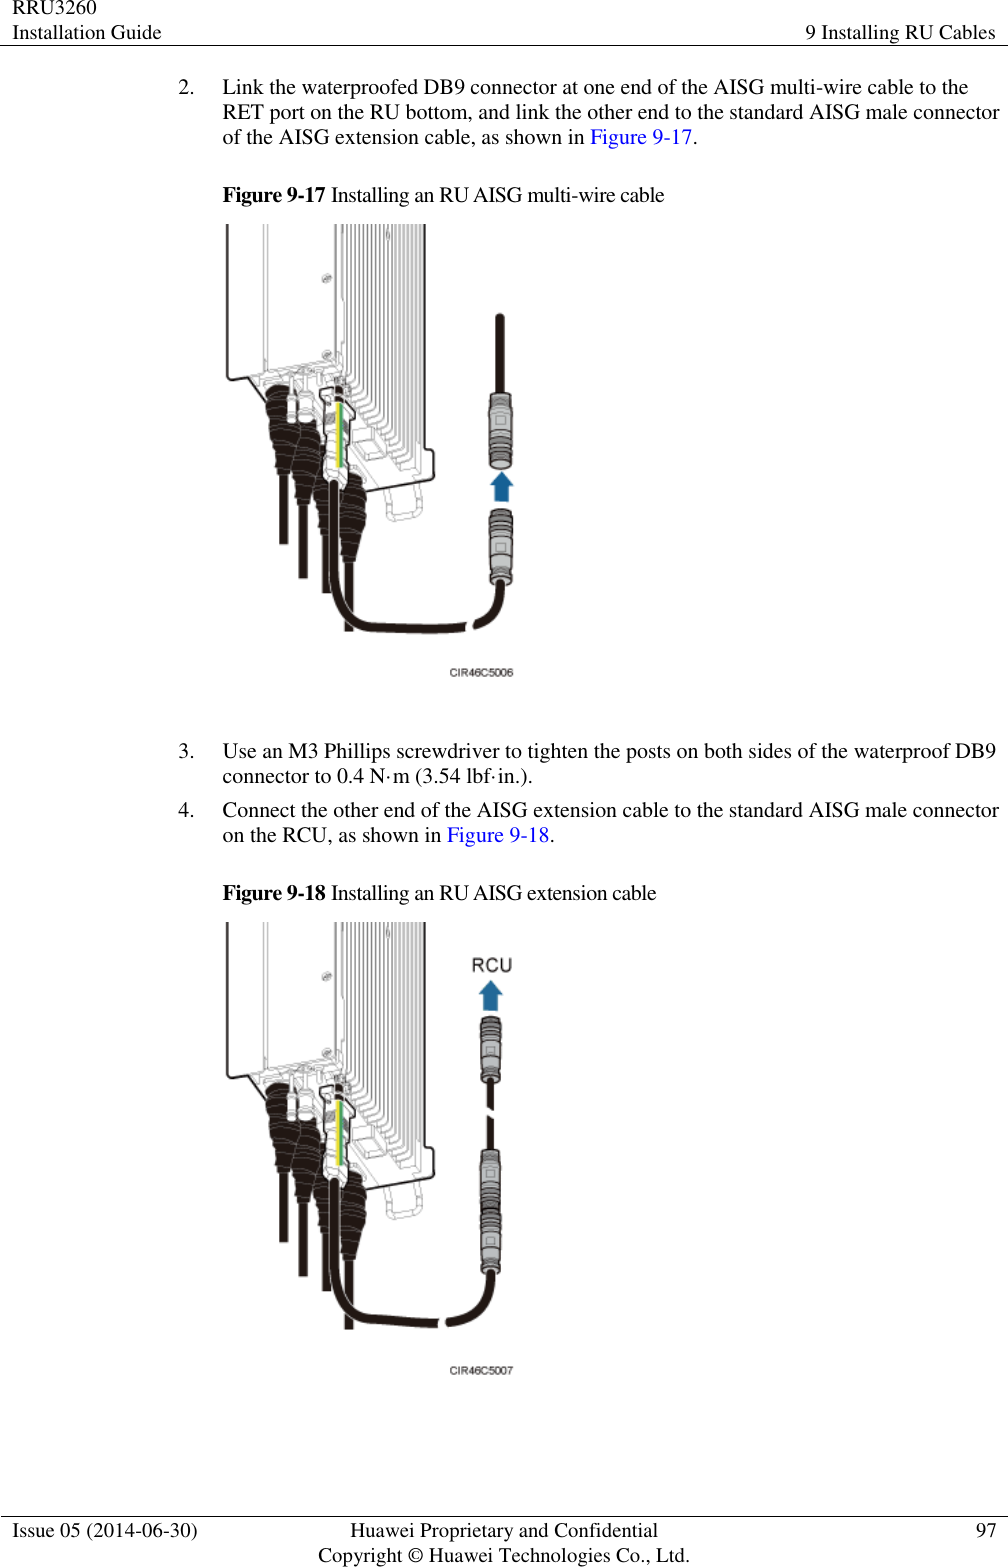 RRU3260 Installation Guide 9 Installing RU Cables  Issue 05 (2014-06-30) Huawei Proprietary and Confidential                                     Copyright © Huawei Technologies Co., Ltd. 97  2. Link the waterproofed DB9 connector at one end of the AISG multi-wire cable to the RET port on the RU bottom, and link the other end to the standard AISG male connector of the AISG extension cable, as shown in Figure 9-17. Figure 9-17 Installing an RU AISG multi-wire cable   3. Use an M3 Phillips screwdriver to tighten the posts on both sides of the waterproof DB9 connector to 0.4 N·m (3.54 lbf·in.). 4. Connect the other end of the AISG extension cable to the standard AISG male connector on the RCU, as shown in Figure 9-18. Figure 9-18 Installing an RU AISG extension cable   